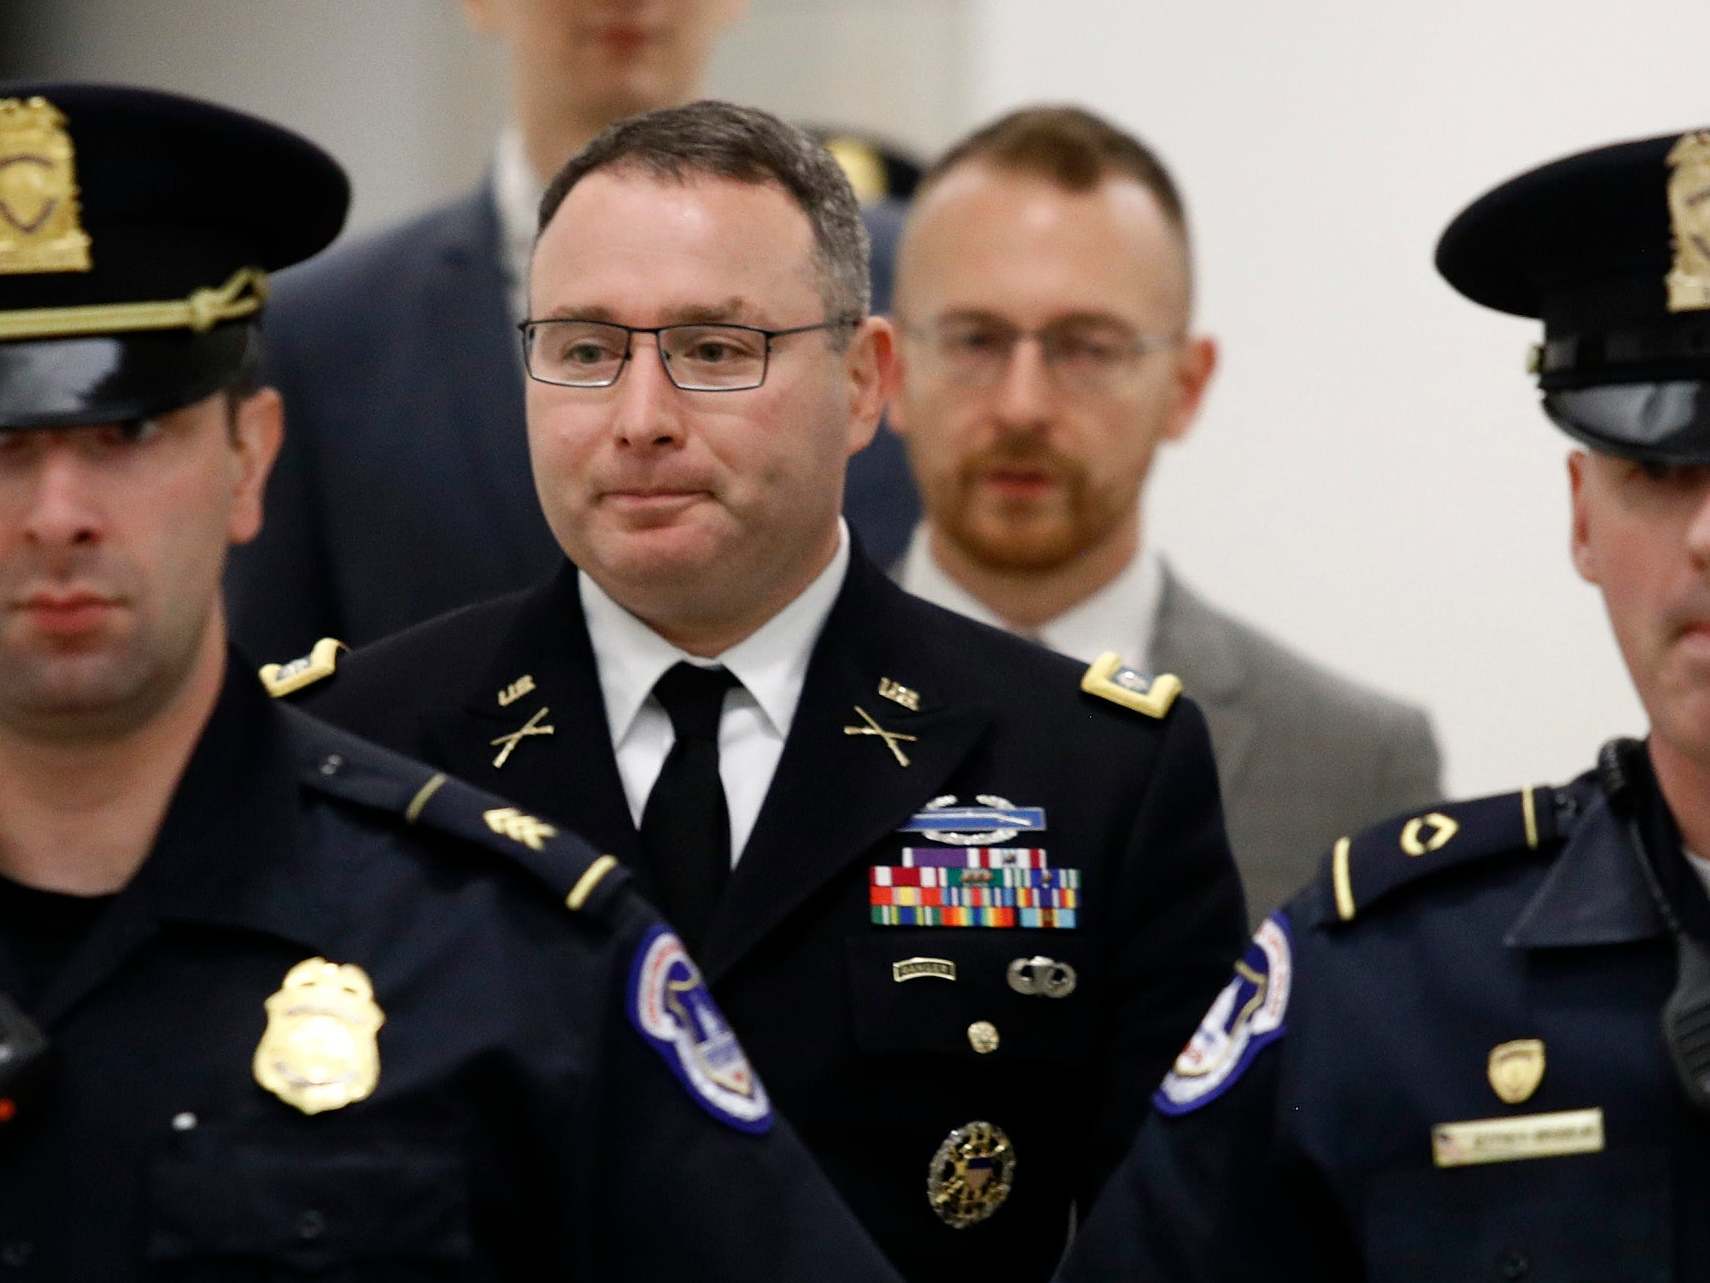 Lt Col Alexander Vindman, second left, leaves a closed-door meeting after testifying for 10 hours as part of the impeachment inquiry into Donald Trump